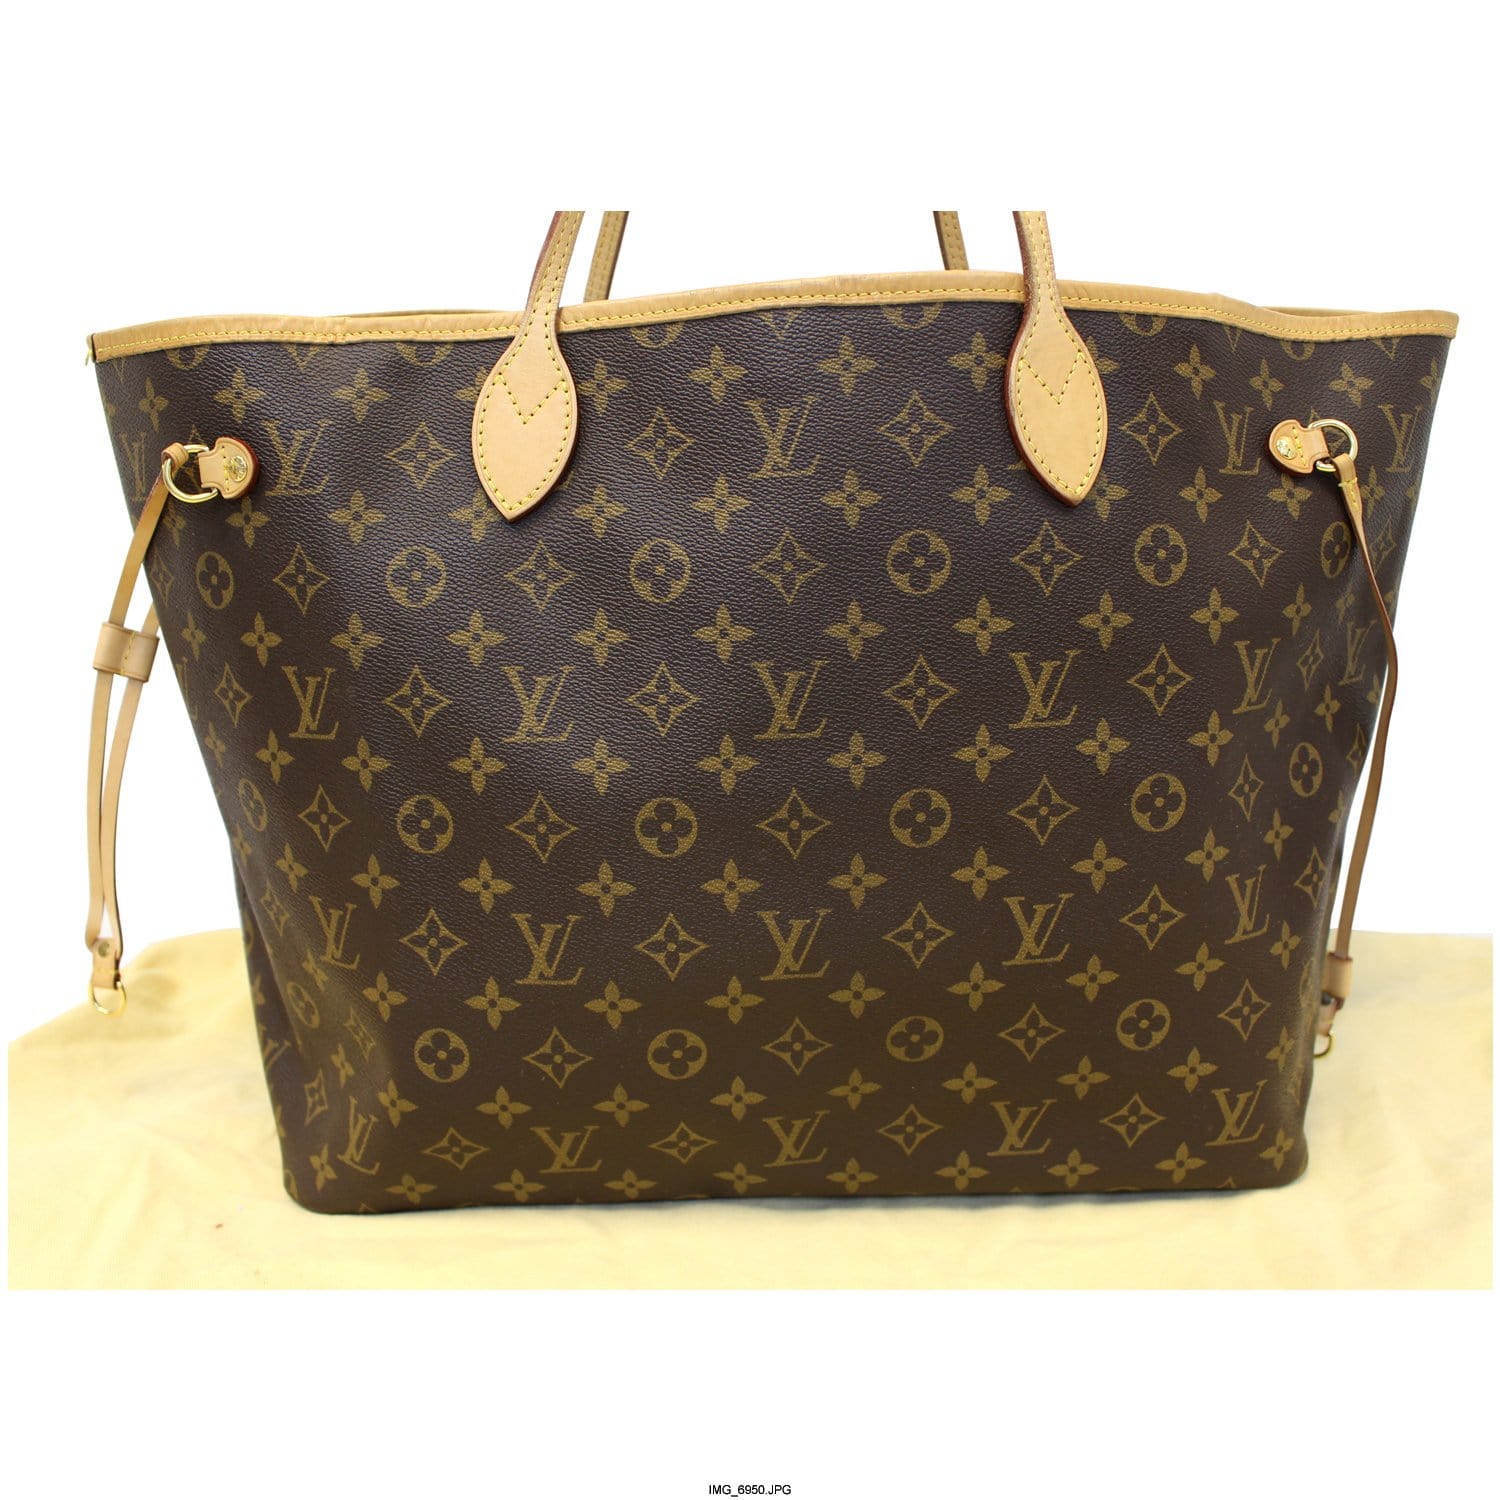 Shop Louis Vuitton NEVERFULL Plain Office Style Crossbody Formal Style  Shoulder Bags (M22921) by パリの凱旋門